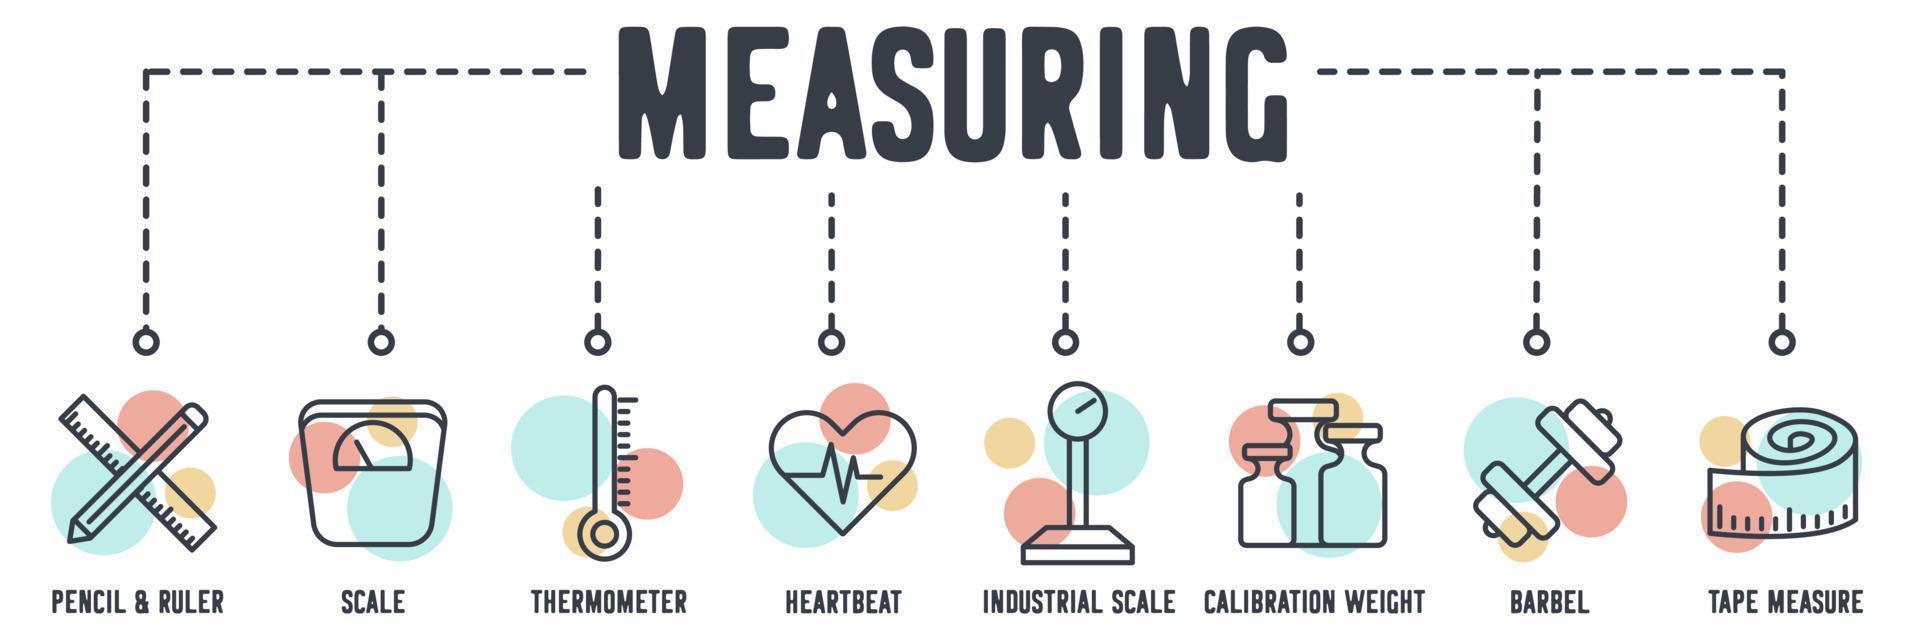 Measuring banner web icon. pencil and ruler, scale, thermometer, heartbeat, industrial scale, Calibration Weight, barbel, tape measure vector illustration concept.